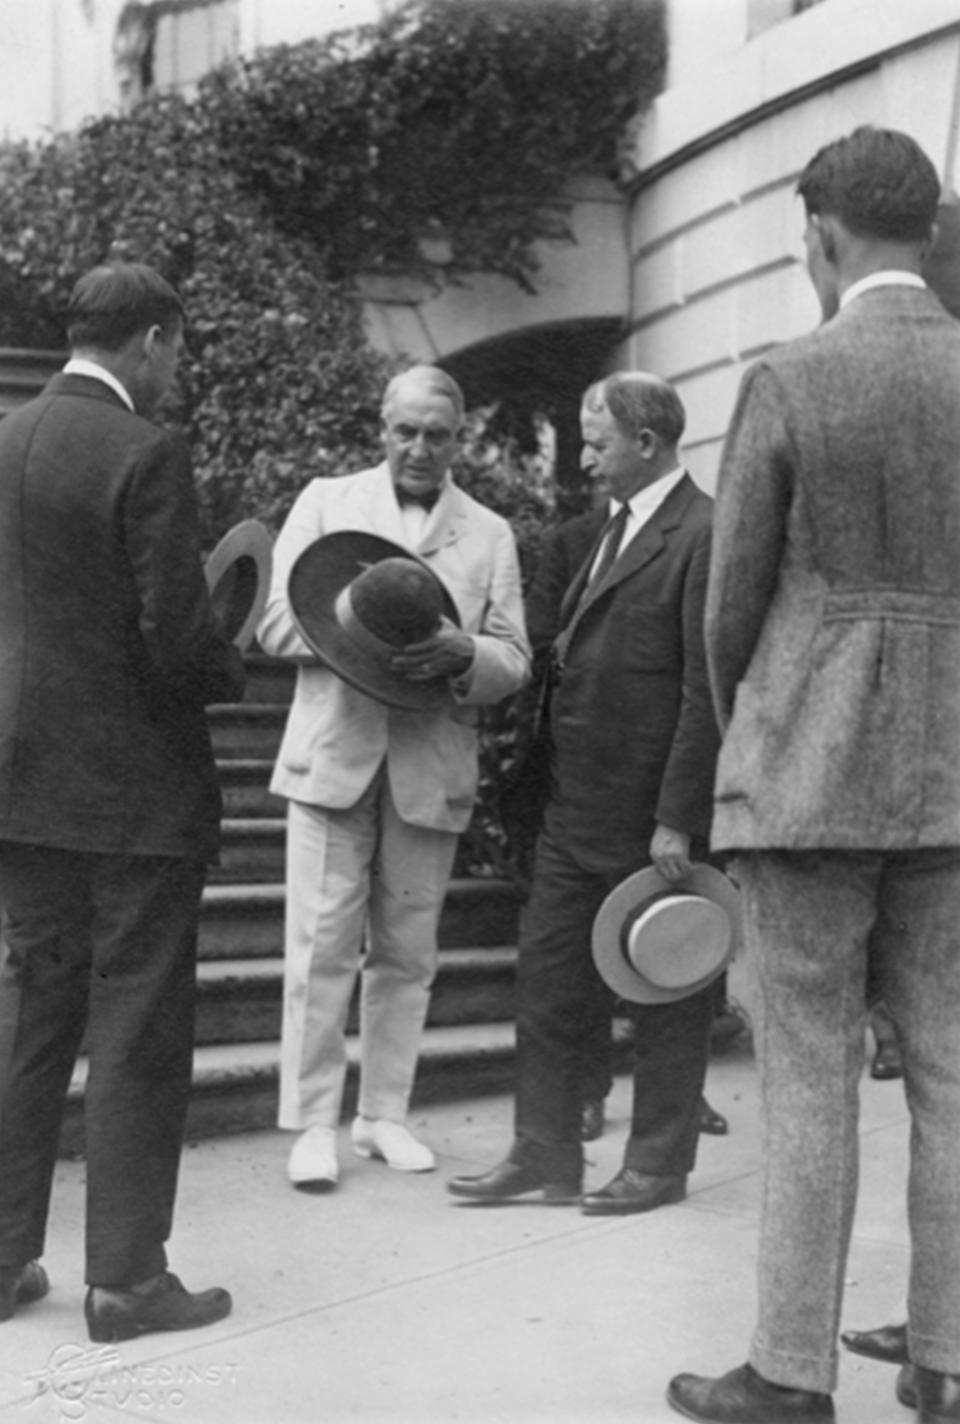 Mondel, center right, with President Warren G. Harding, holding black hat. As the Teapot Dome scandal was about to overwhelm the Harding administration in 1922, Mondell worked hard to get more money in royalties for Wyoming inserted into the corrupt oil lease that was causing all the stir. His bill failed to pass, however. Mondell soon lost a Senate bid but stayed active in Republican Party politics. American Heritage Center.